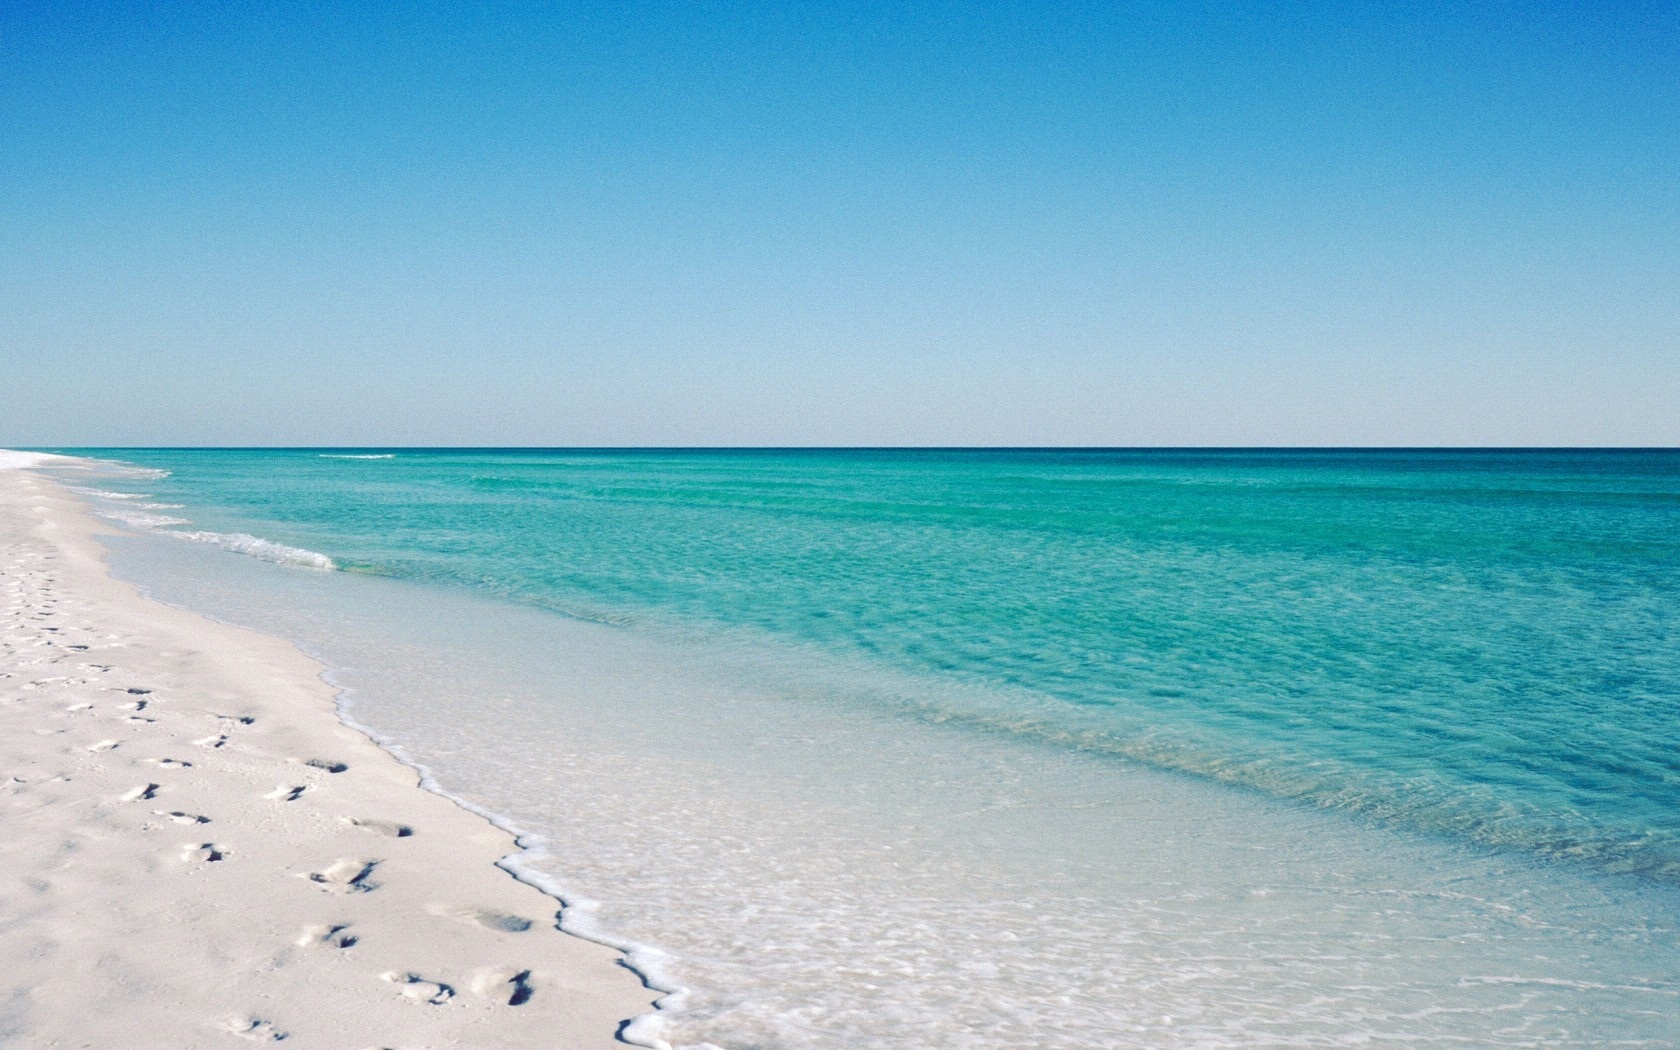 Florida Beach Wallpaper Florida Beach Pictures Cool Wallpapers www